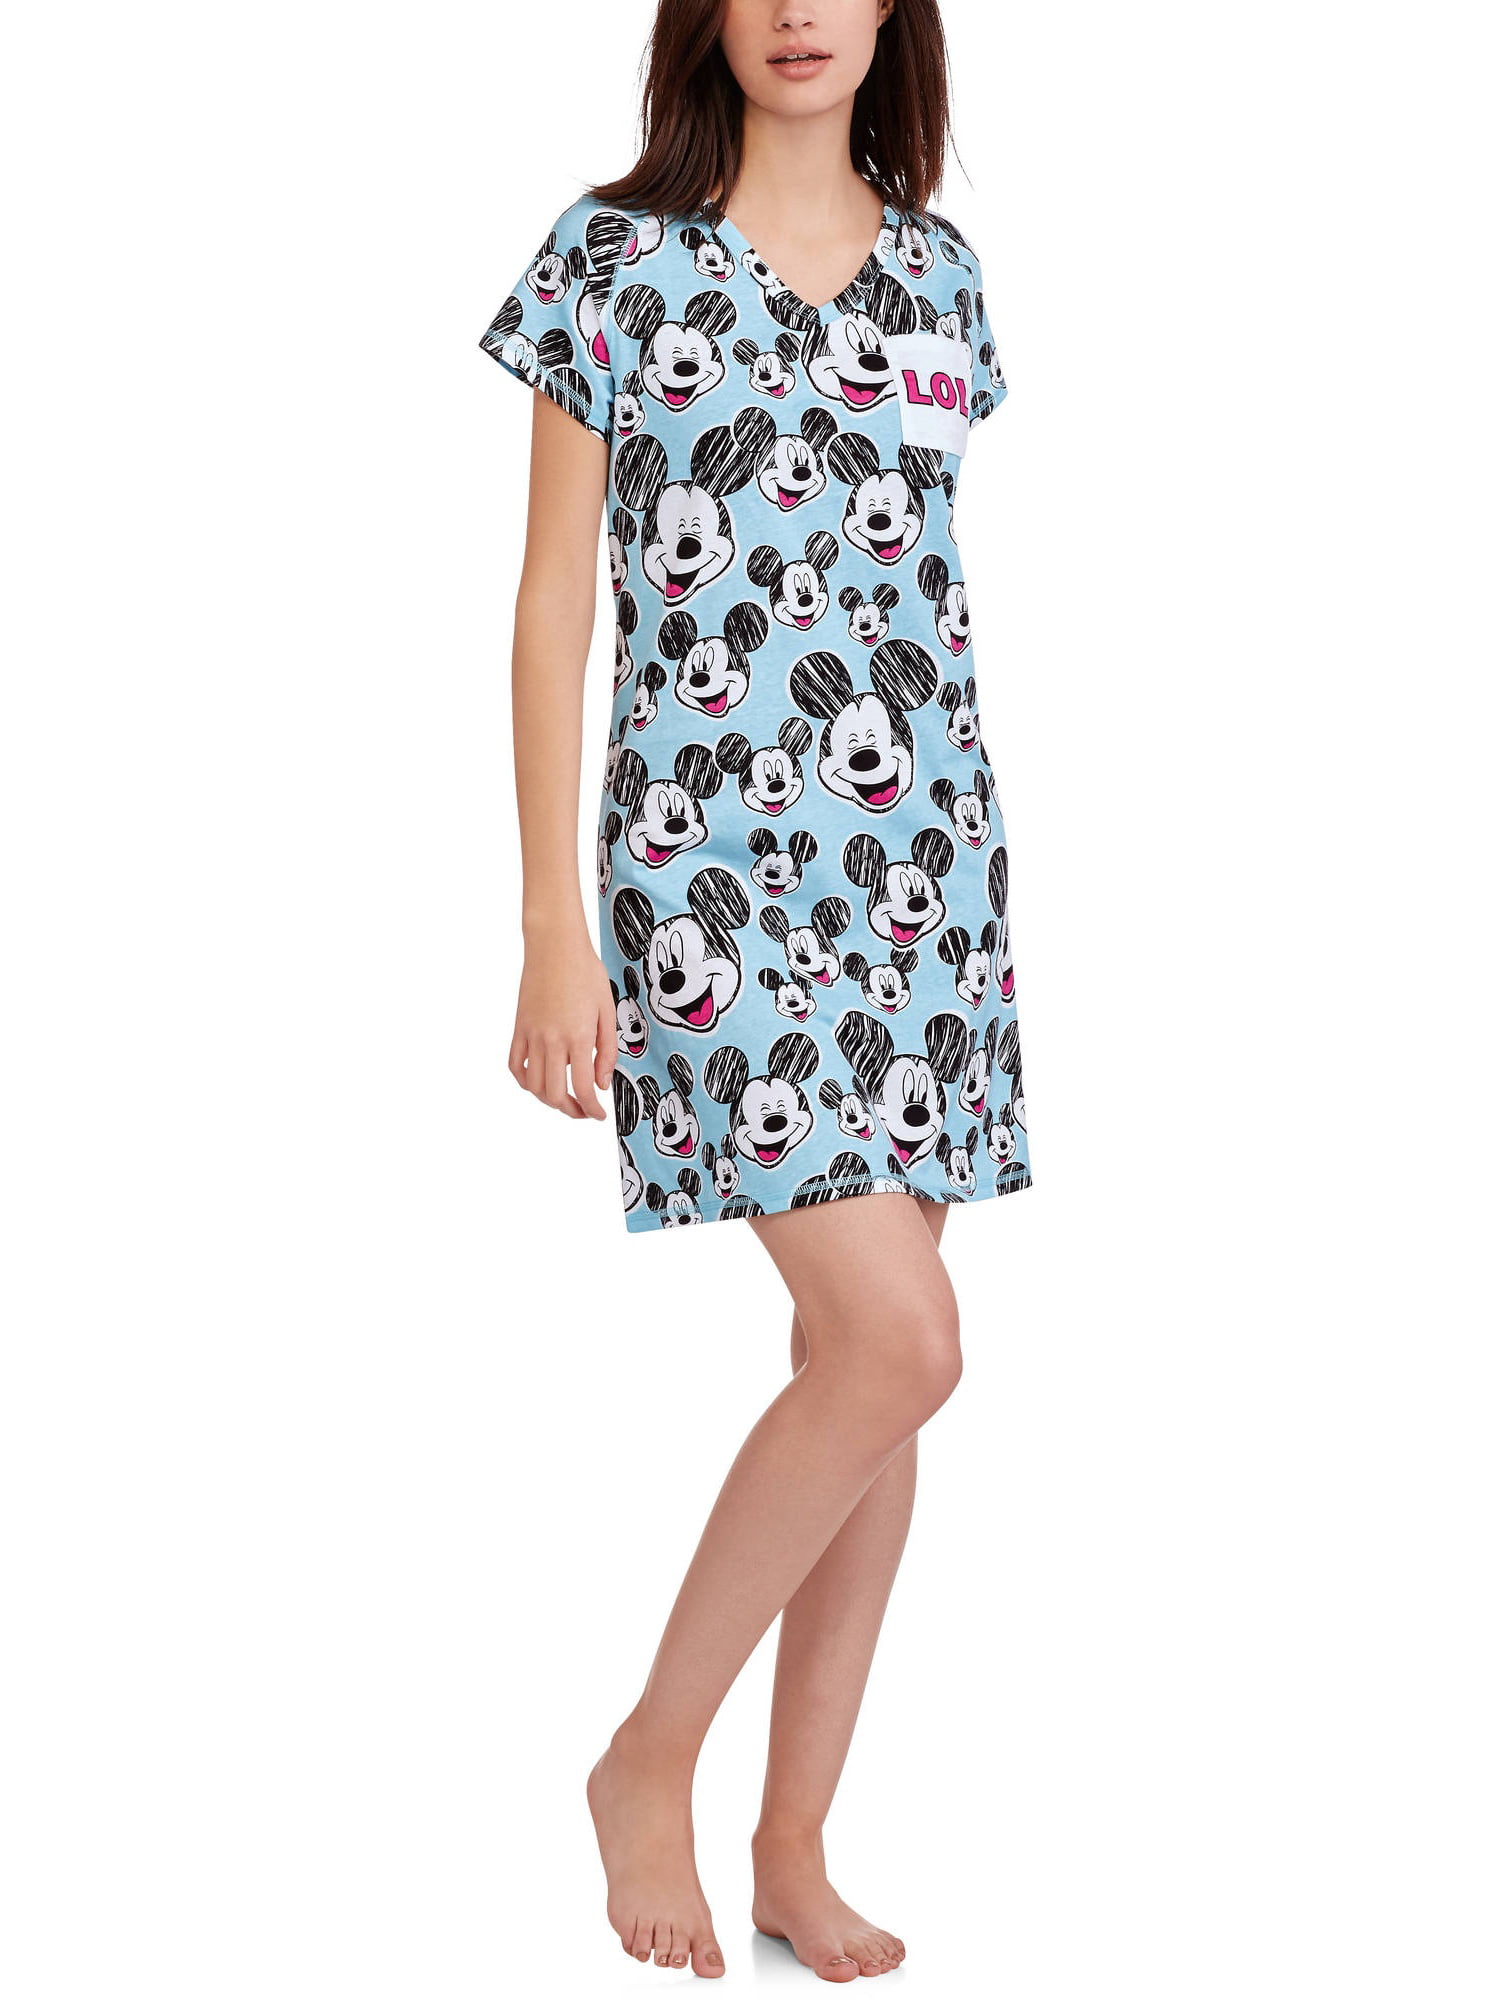 Disney Store Mickey Mouse Nightshirt Nightgown 3X-New w/Tags-Free Ship